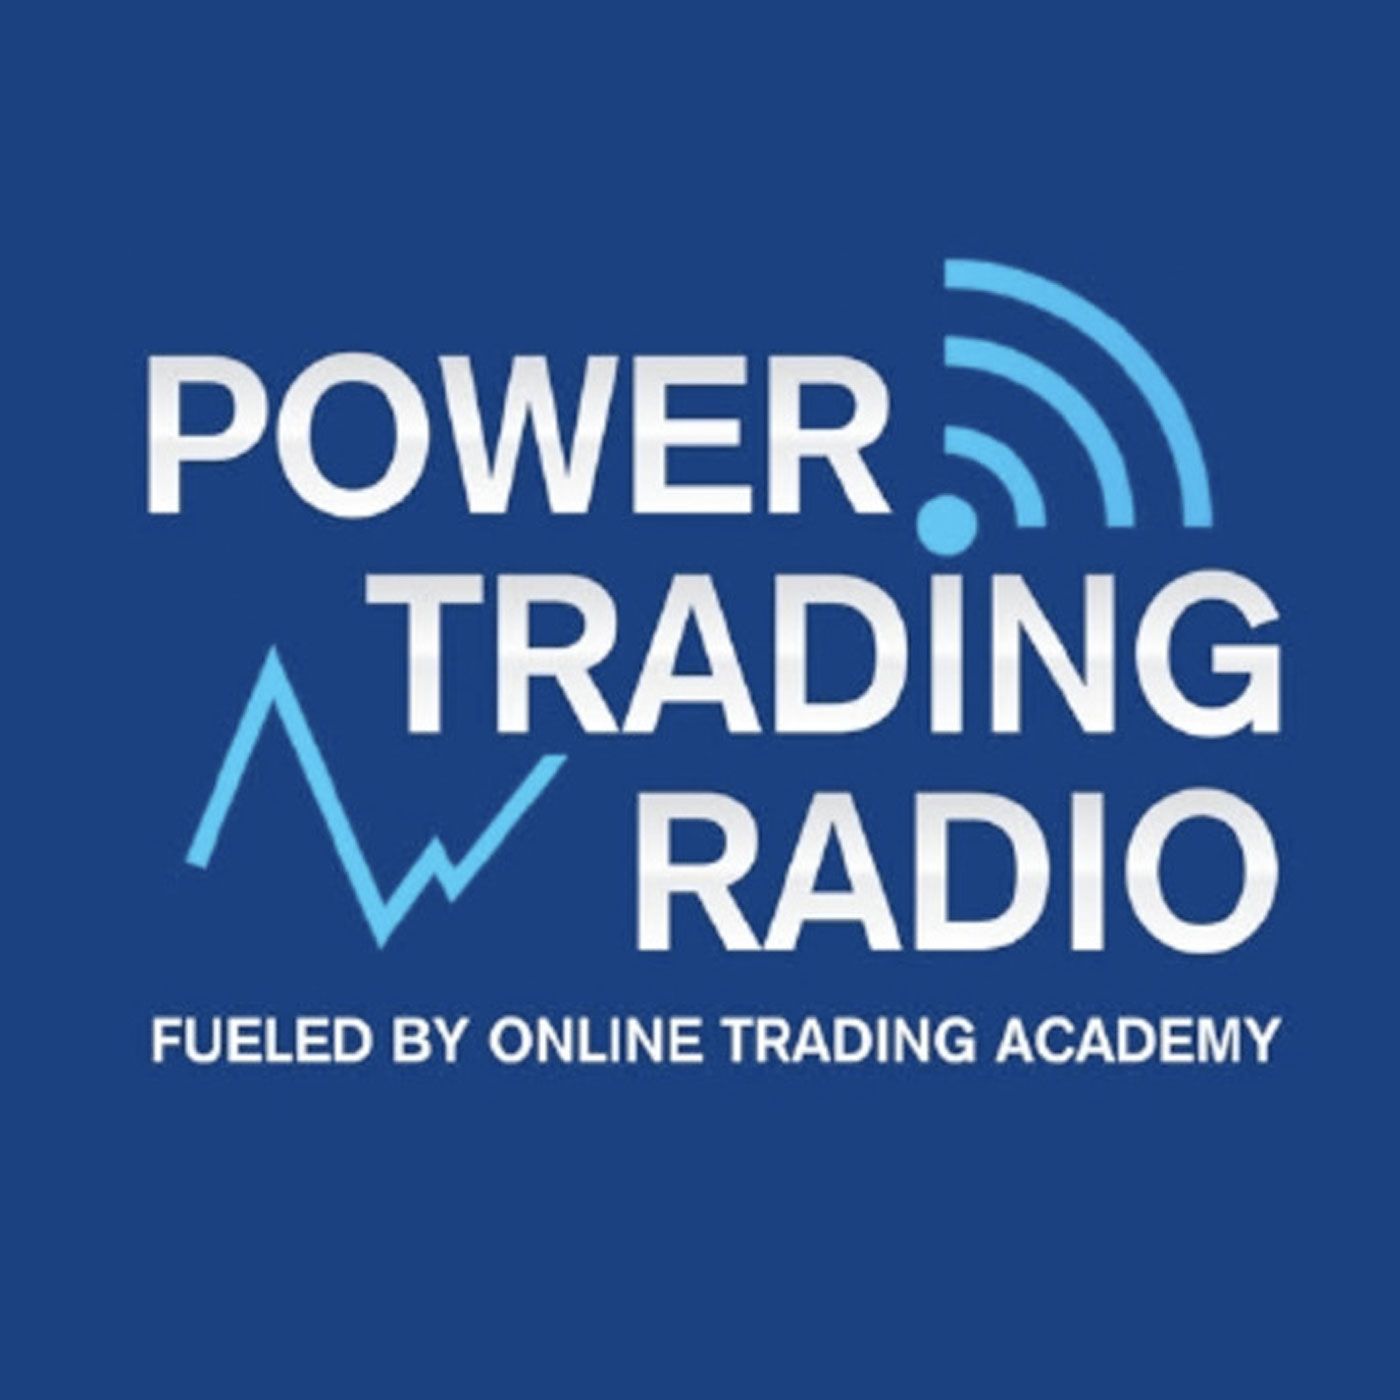 ONLINE TRADING ACADEMY 2/2-3/19